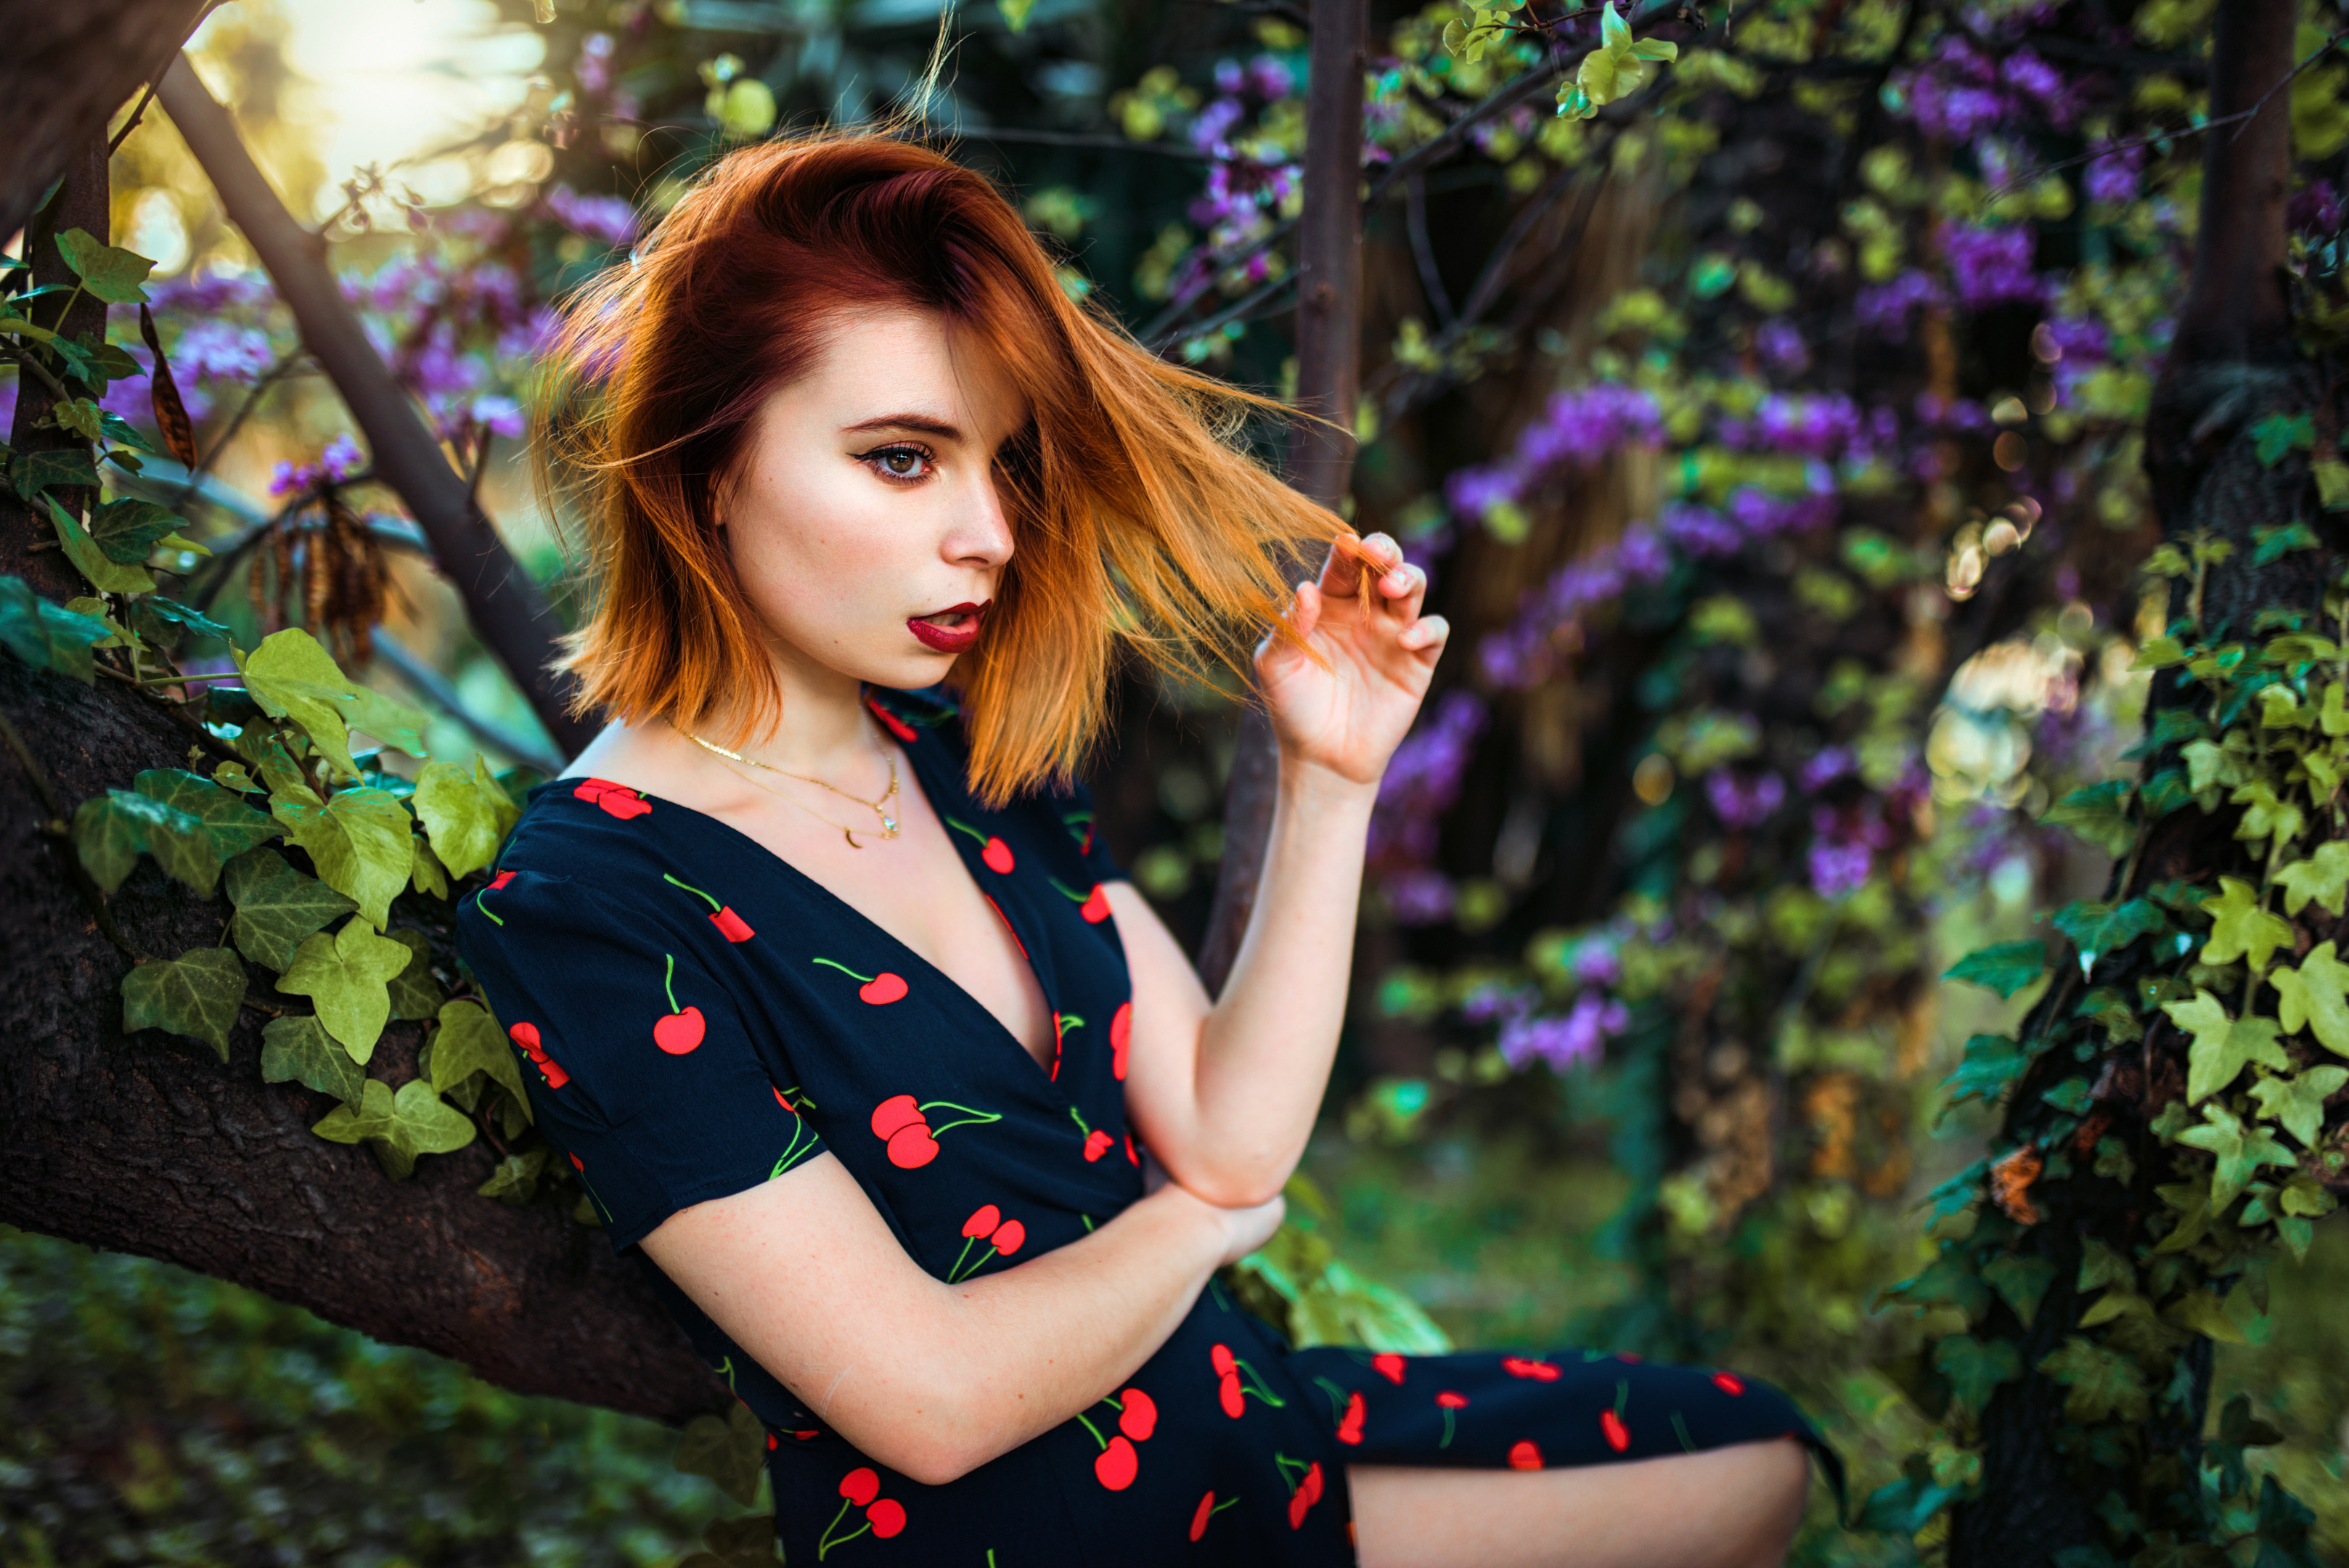 Women Model Redhead Profile Looking Away Touching Hair Red Lipstick Makeup Parted Lips Brown Eyes Ne 3236x2160